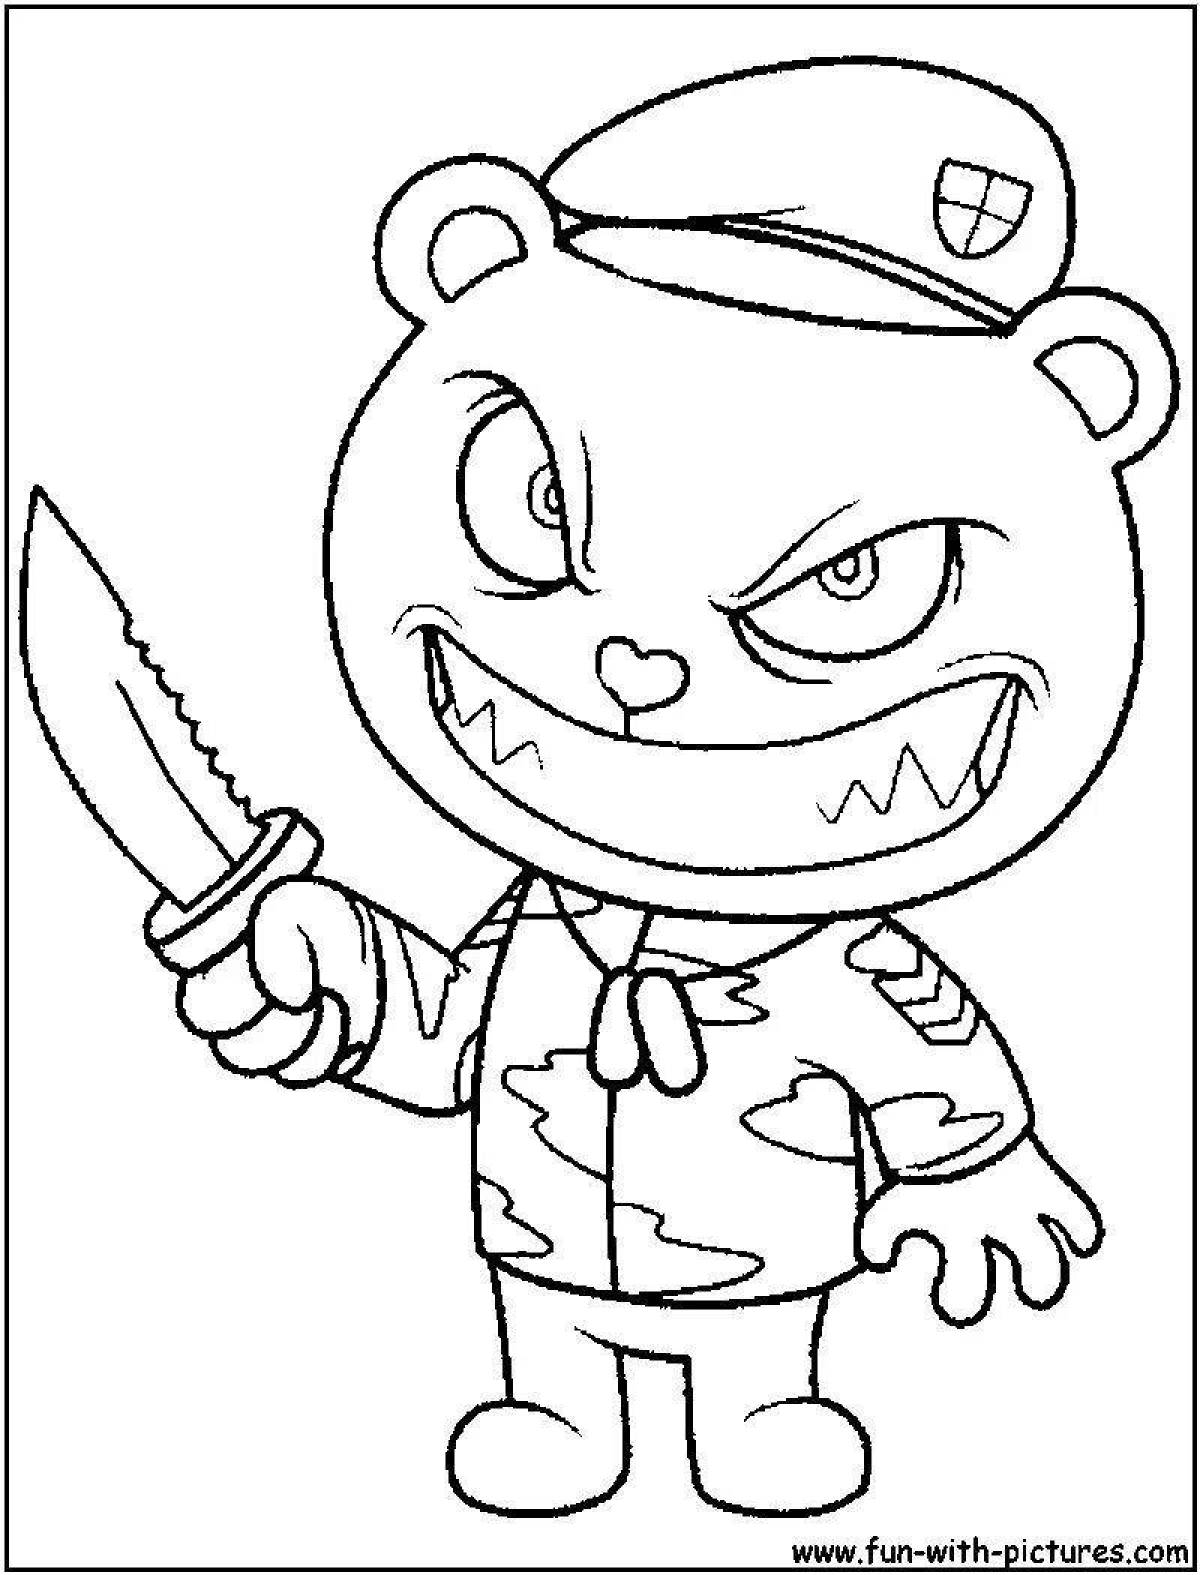 Charming green friend coloring page